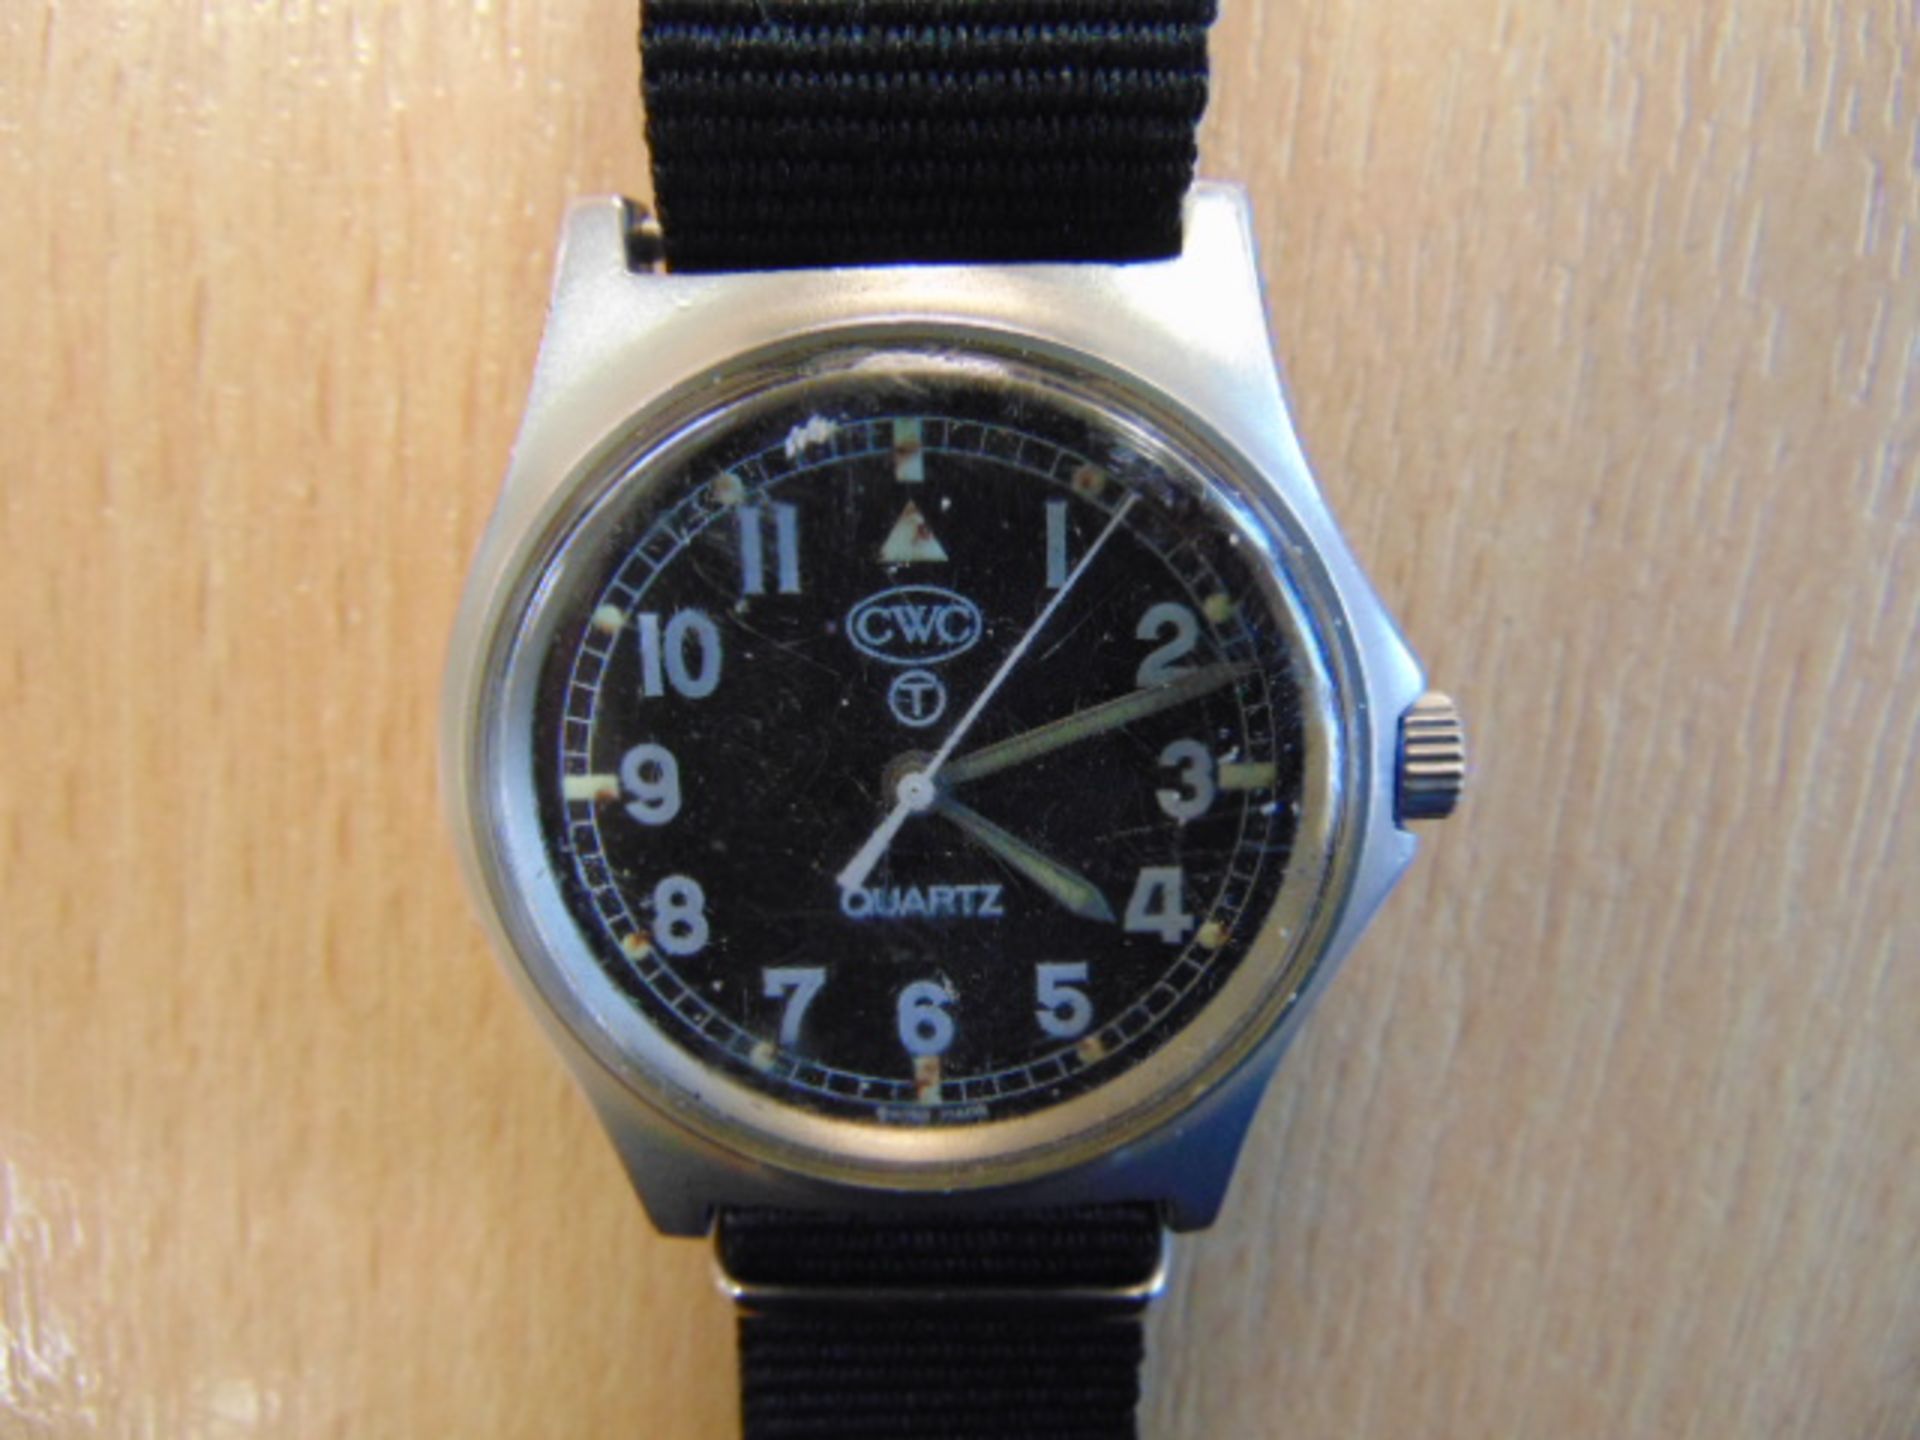 CWC 0552 ROYAL MARINES/ NAVY ISSUE SERVICE WATCH DATED 1990 (GULF WAR) - Image 2 of 7